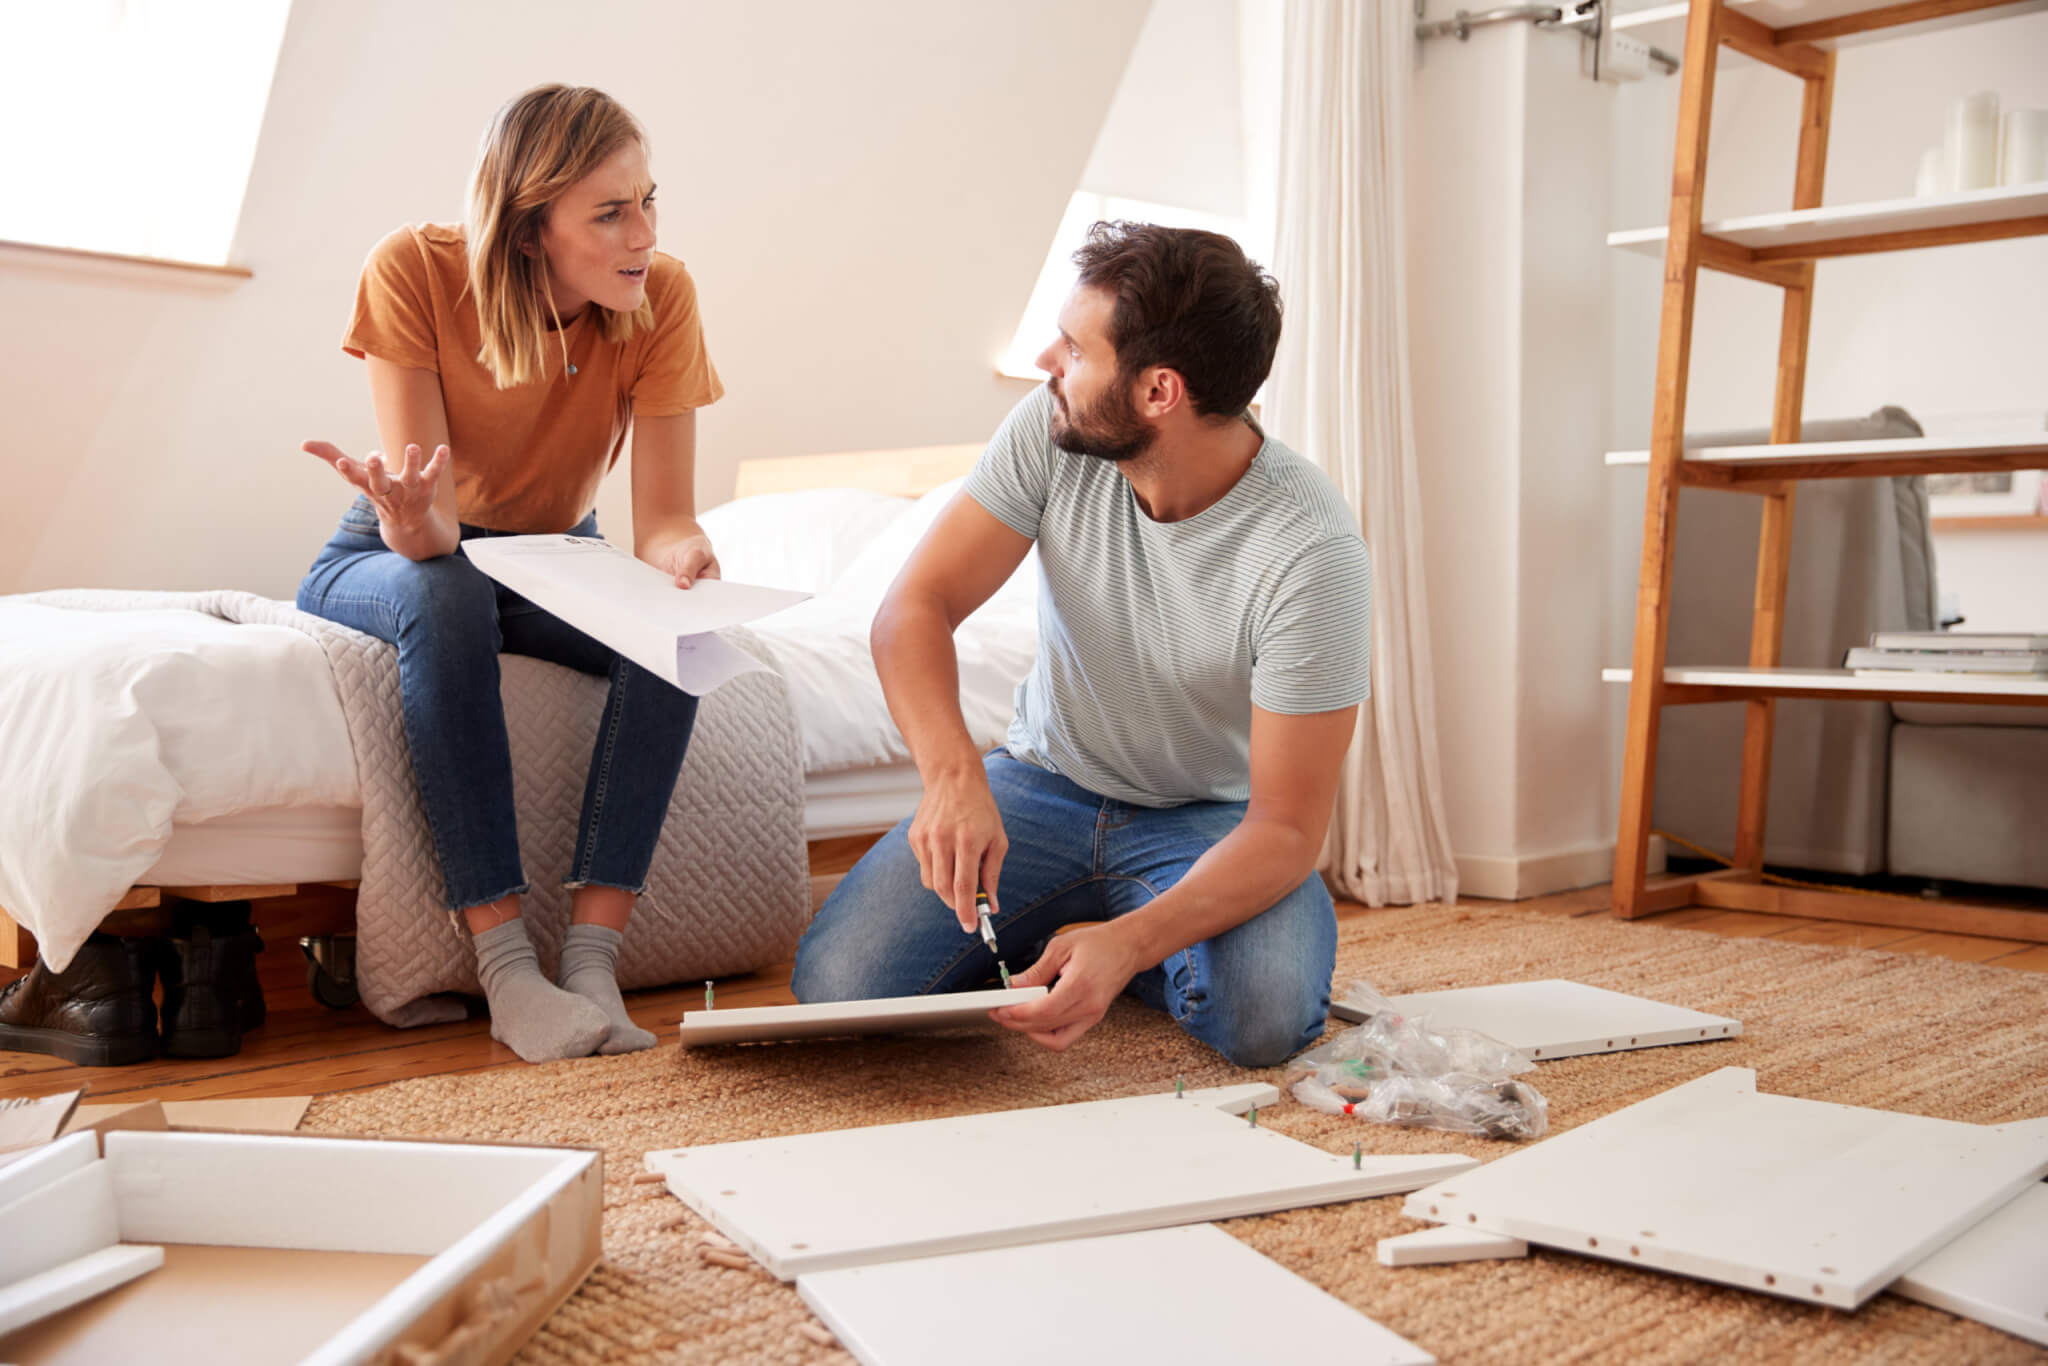 DIY disaster! It takes 5 hours of home improvement failures before people  call for help - Study Finds